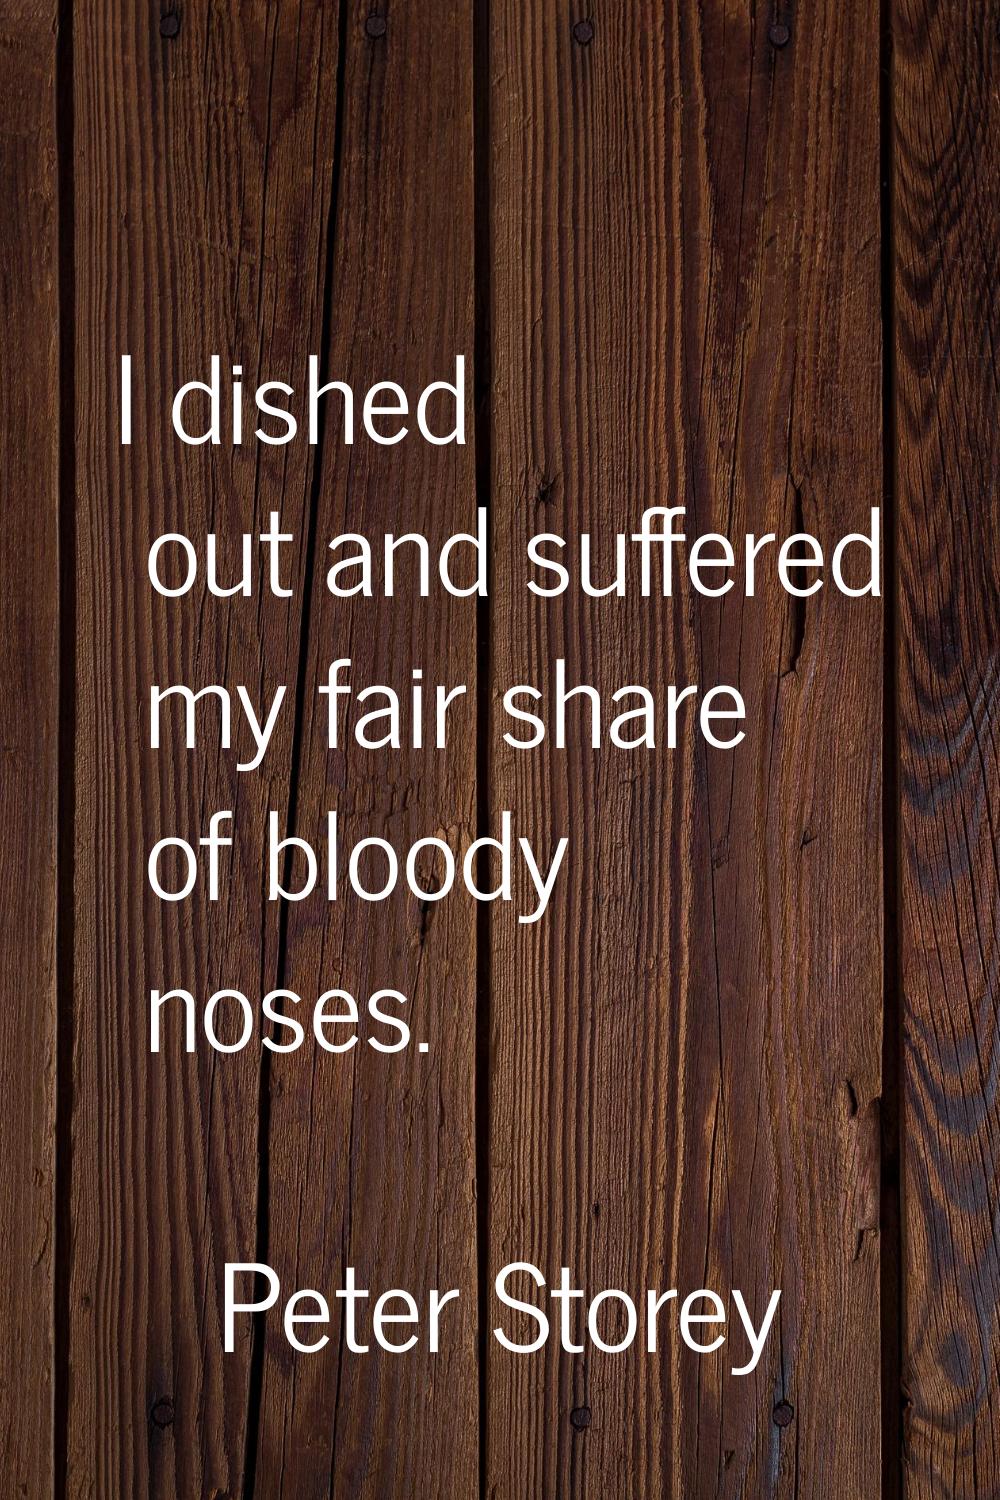 I dished out and suffered my fair share of bloody noses.